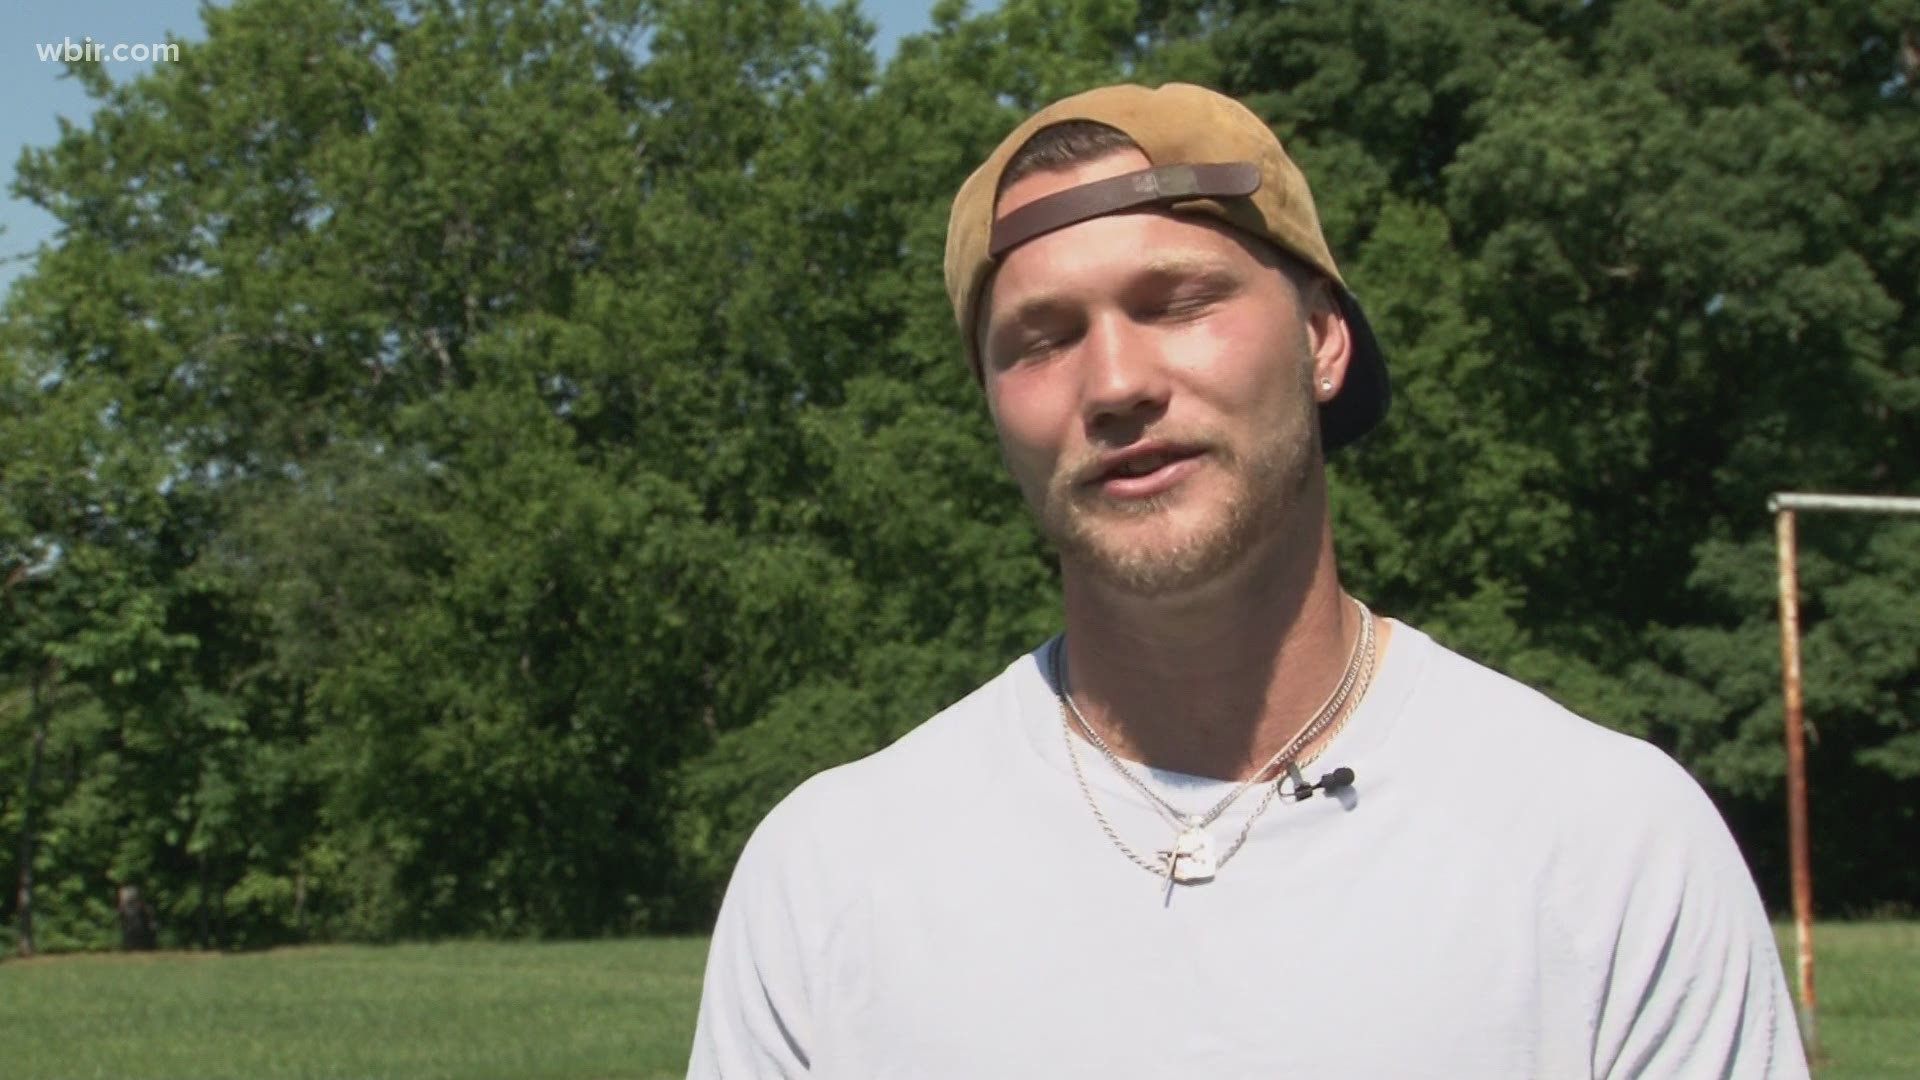 Harley Wheeler, a South Knoxville rugby player, is returning home after narrowly missing the Summer Olympics.